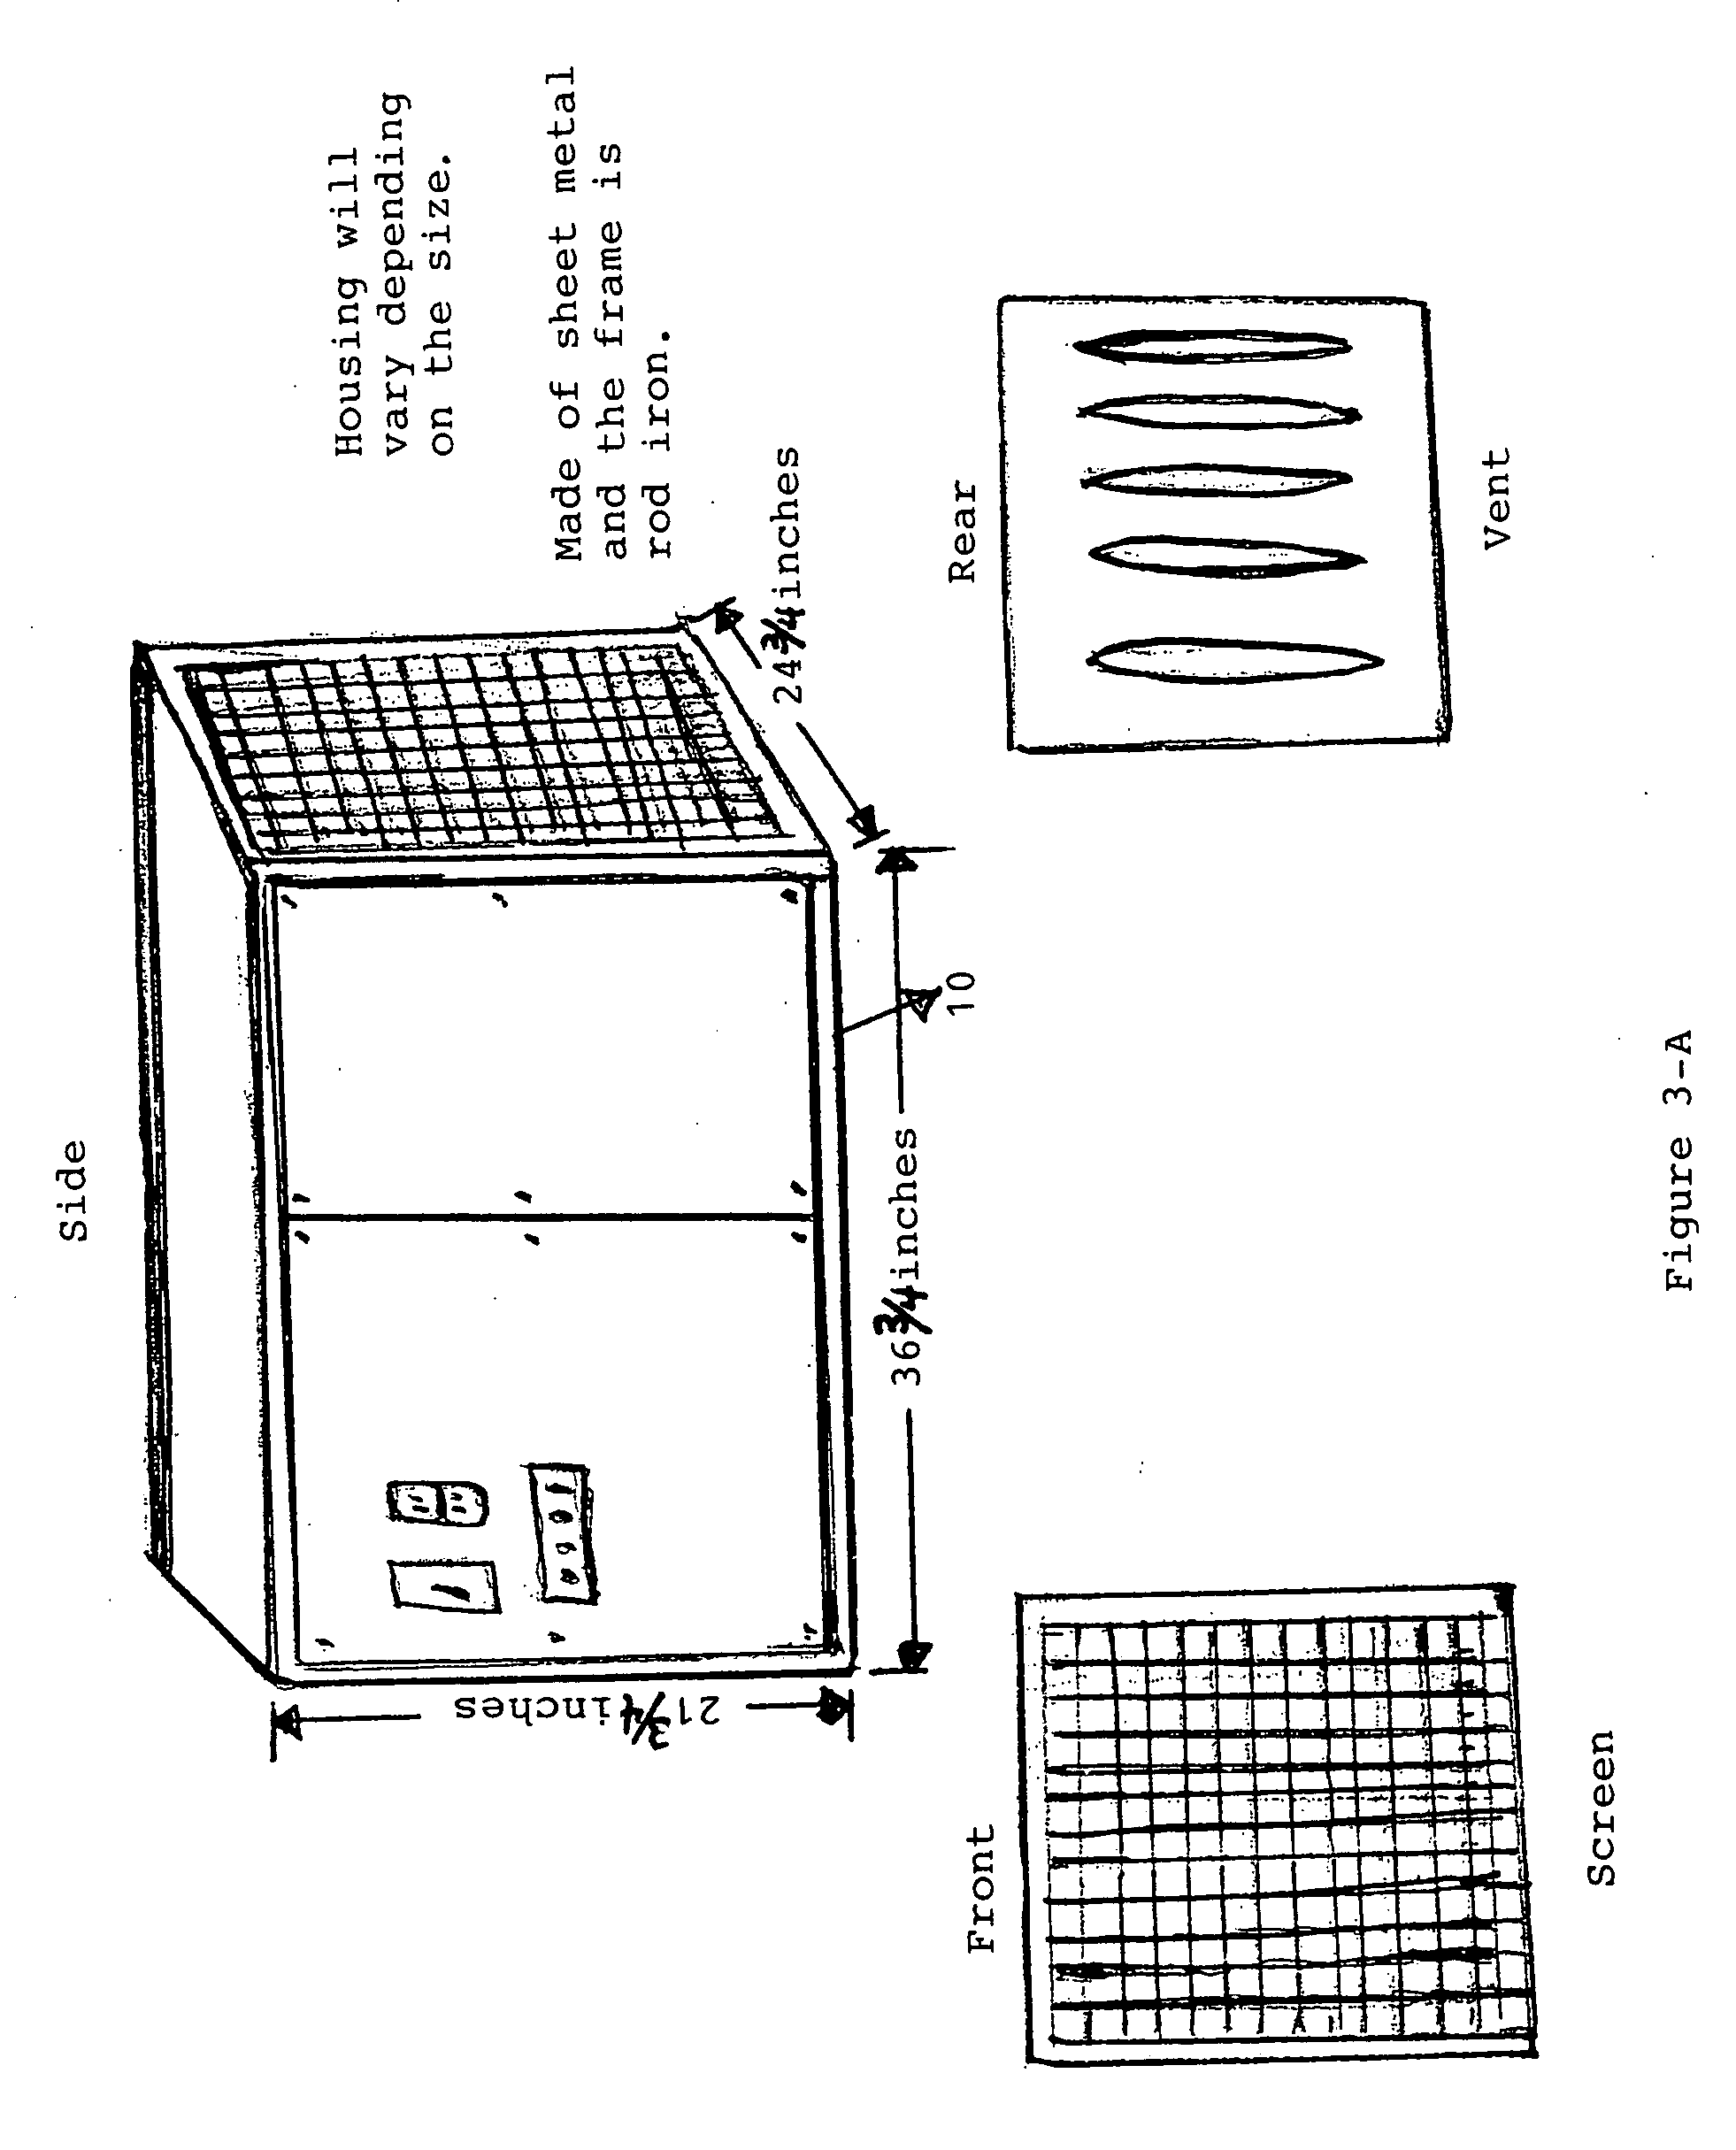 Method for recharging a battery at the same time it is being used as a power source